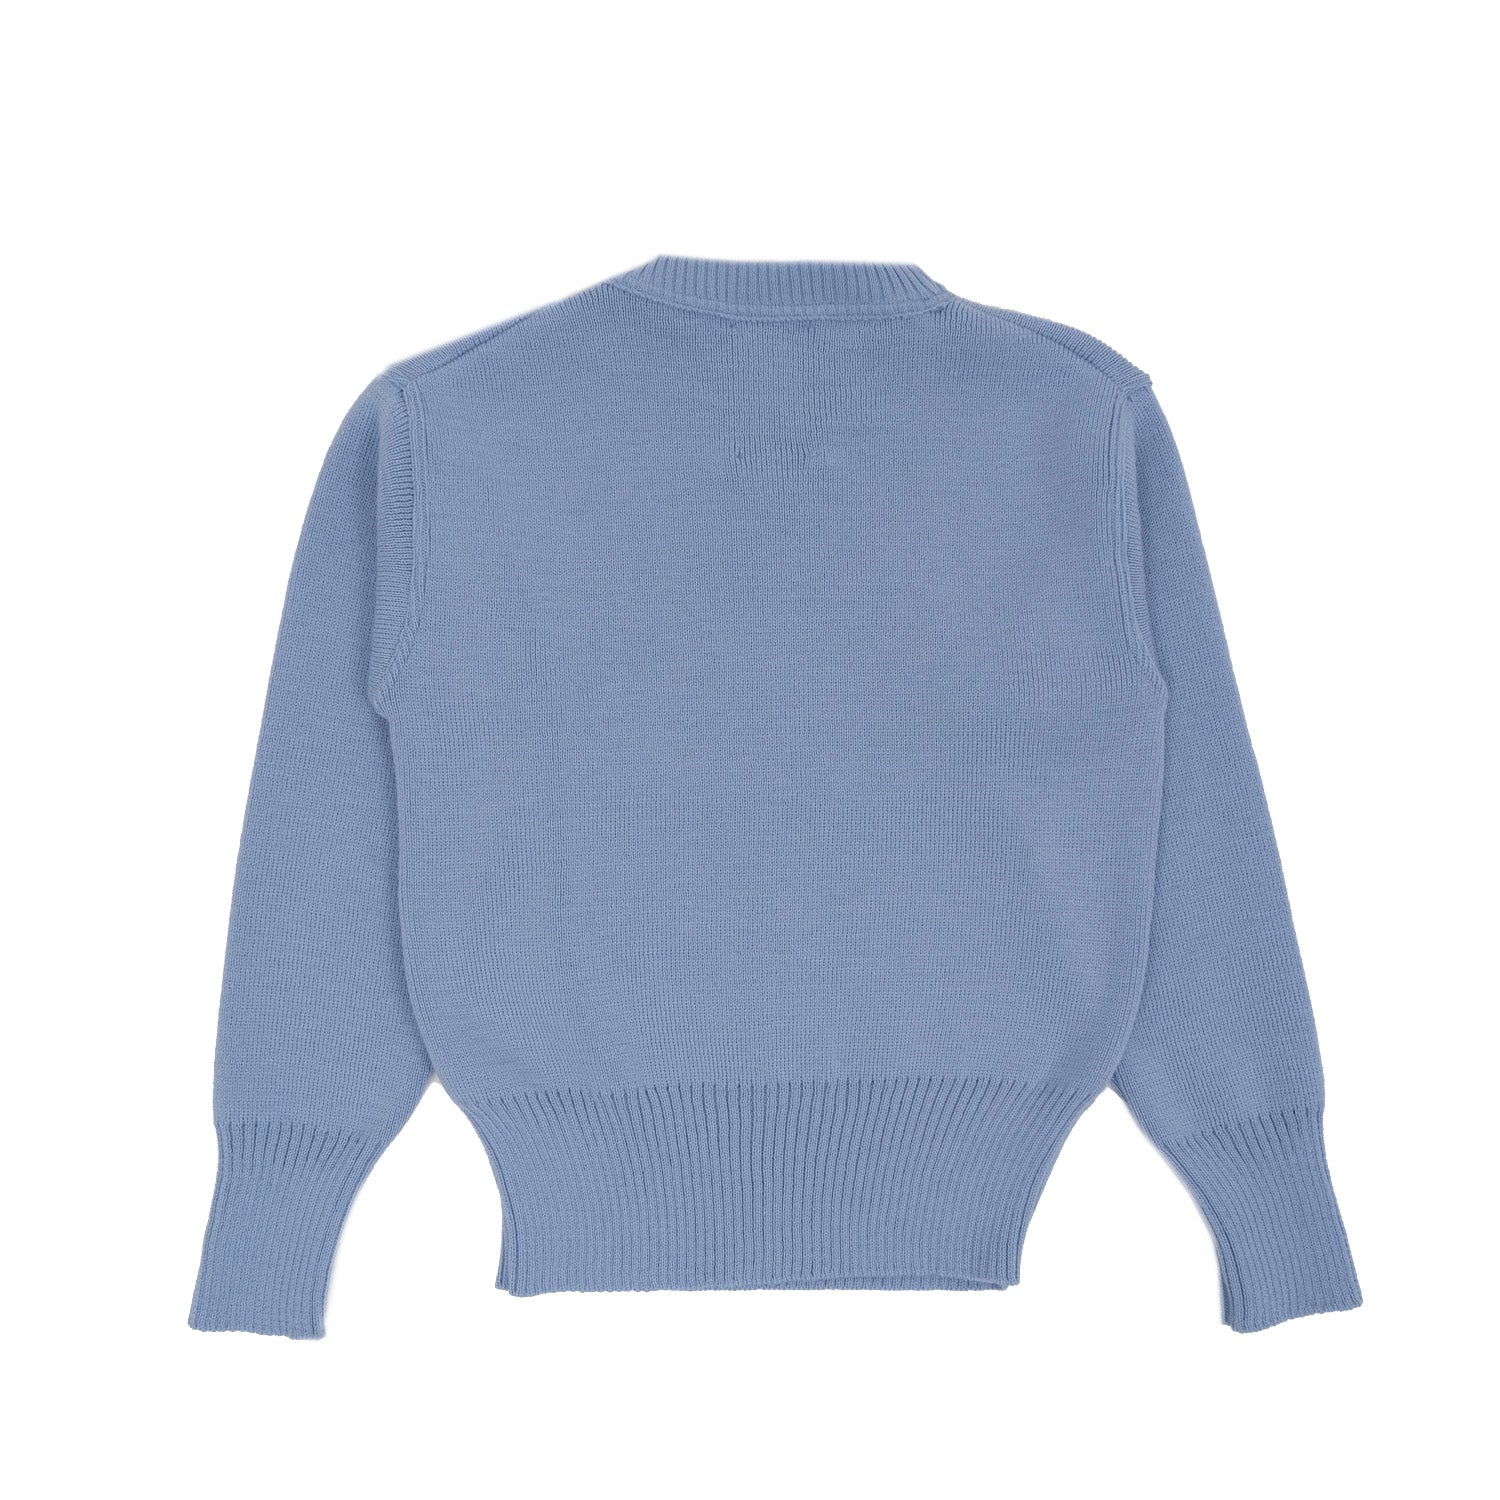 JERSEY 1940 – BABY BLUE - BRUT Clothing